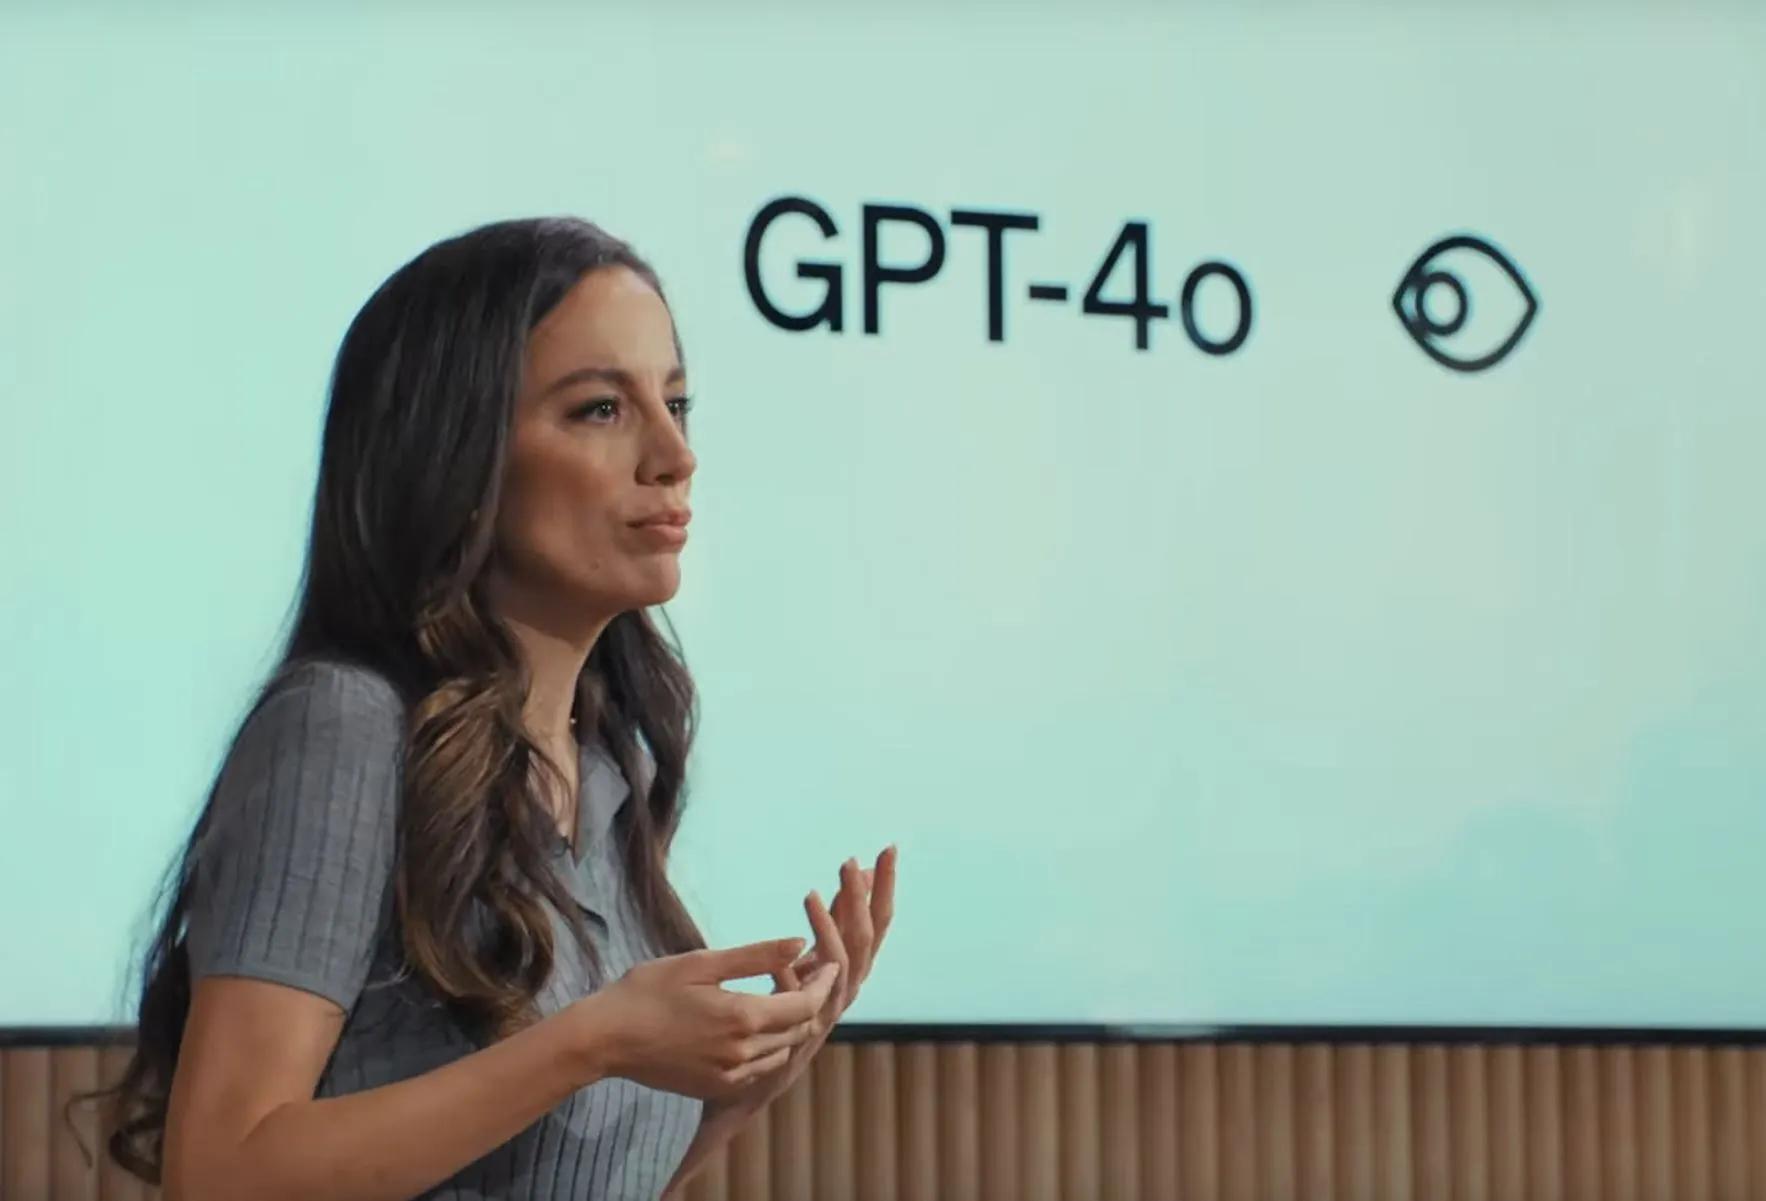 Revolutionizing AI Assistance: OpenAI Unveils GPT-4o with Speech, Text, and Visual Capabilities